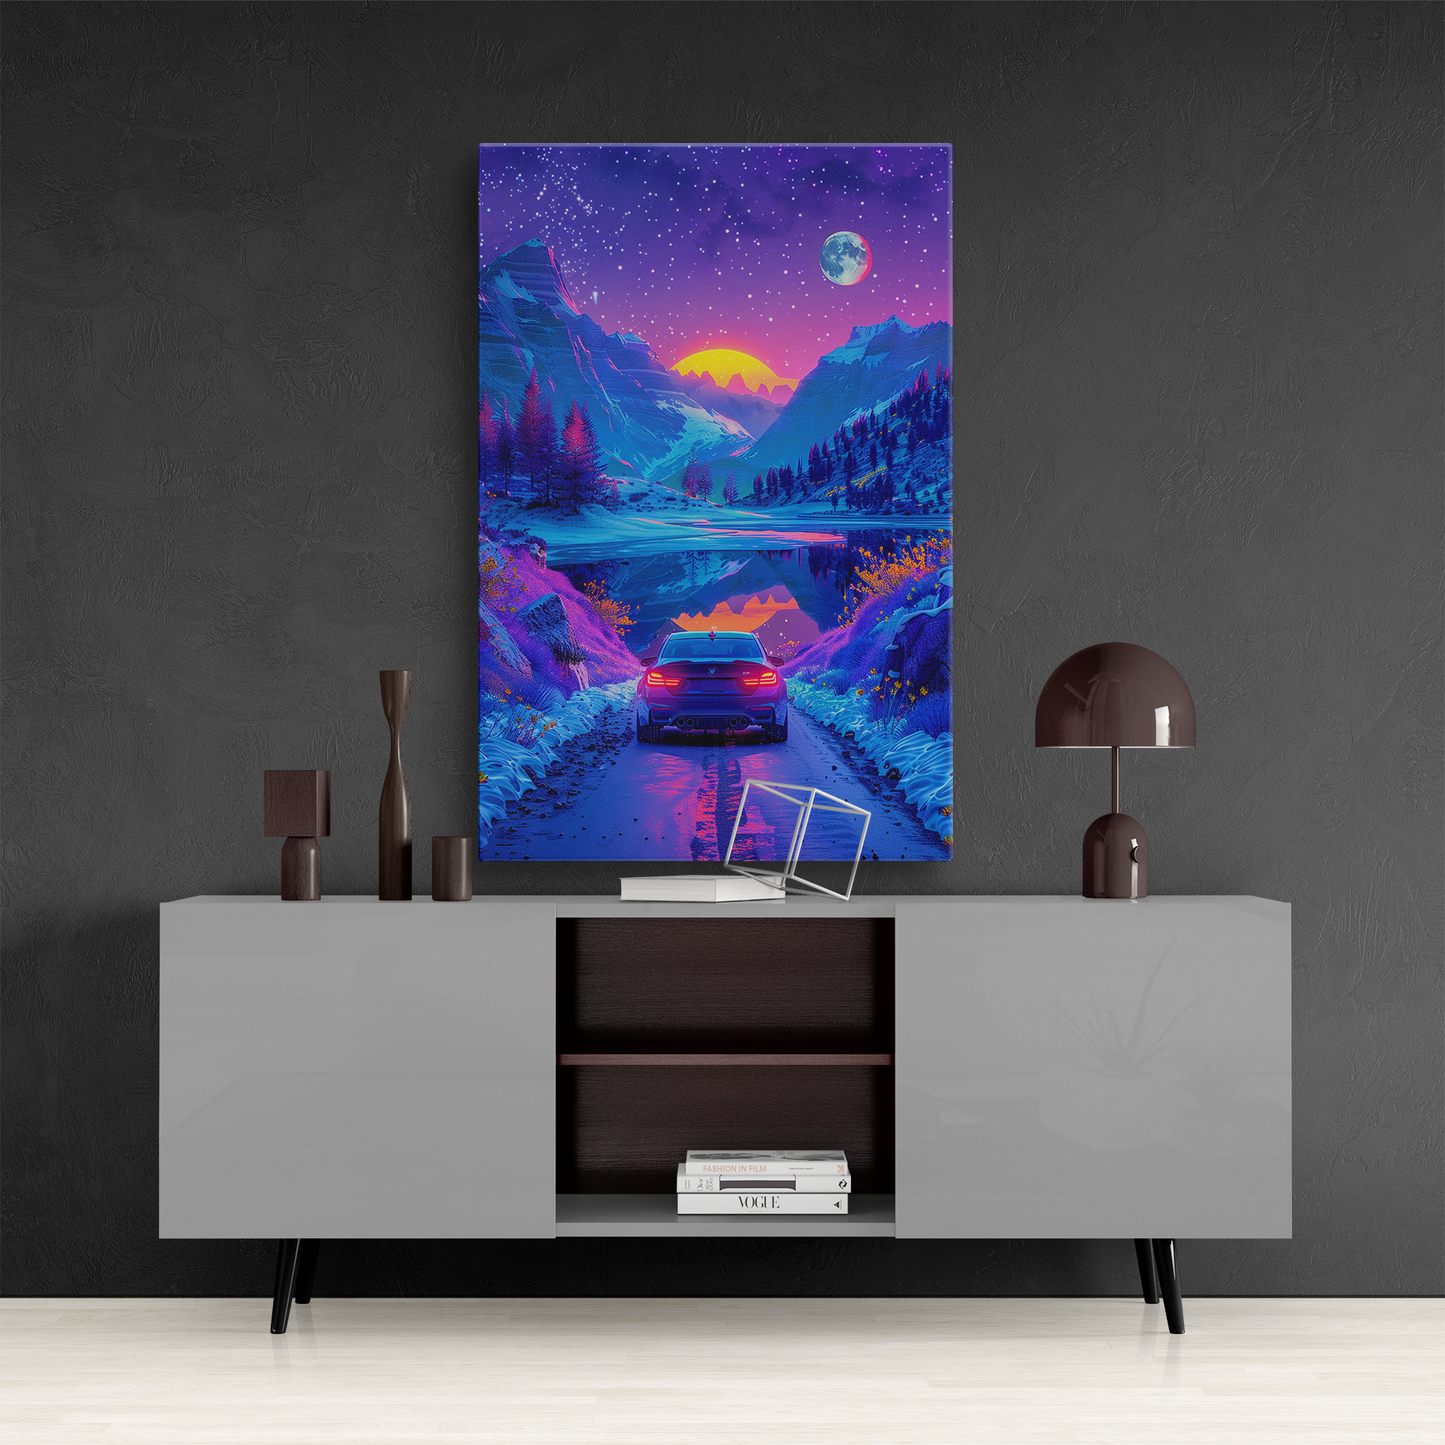 Celestial Drive (Canvas)Discover Celestial Drive on canvas at RimaGallery. Elevate your space with ethically produced, vibrant art. Free US shipping. Shop now!RimaGallery